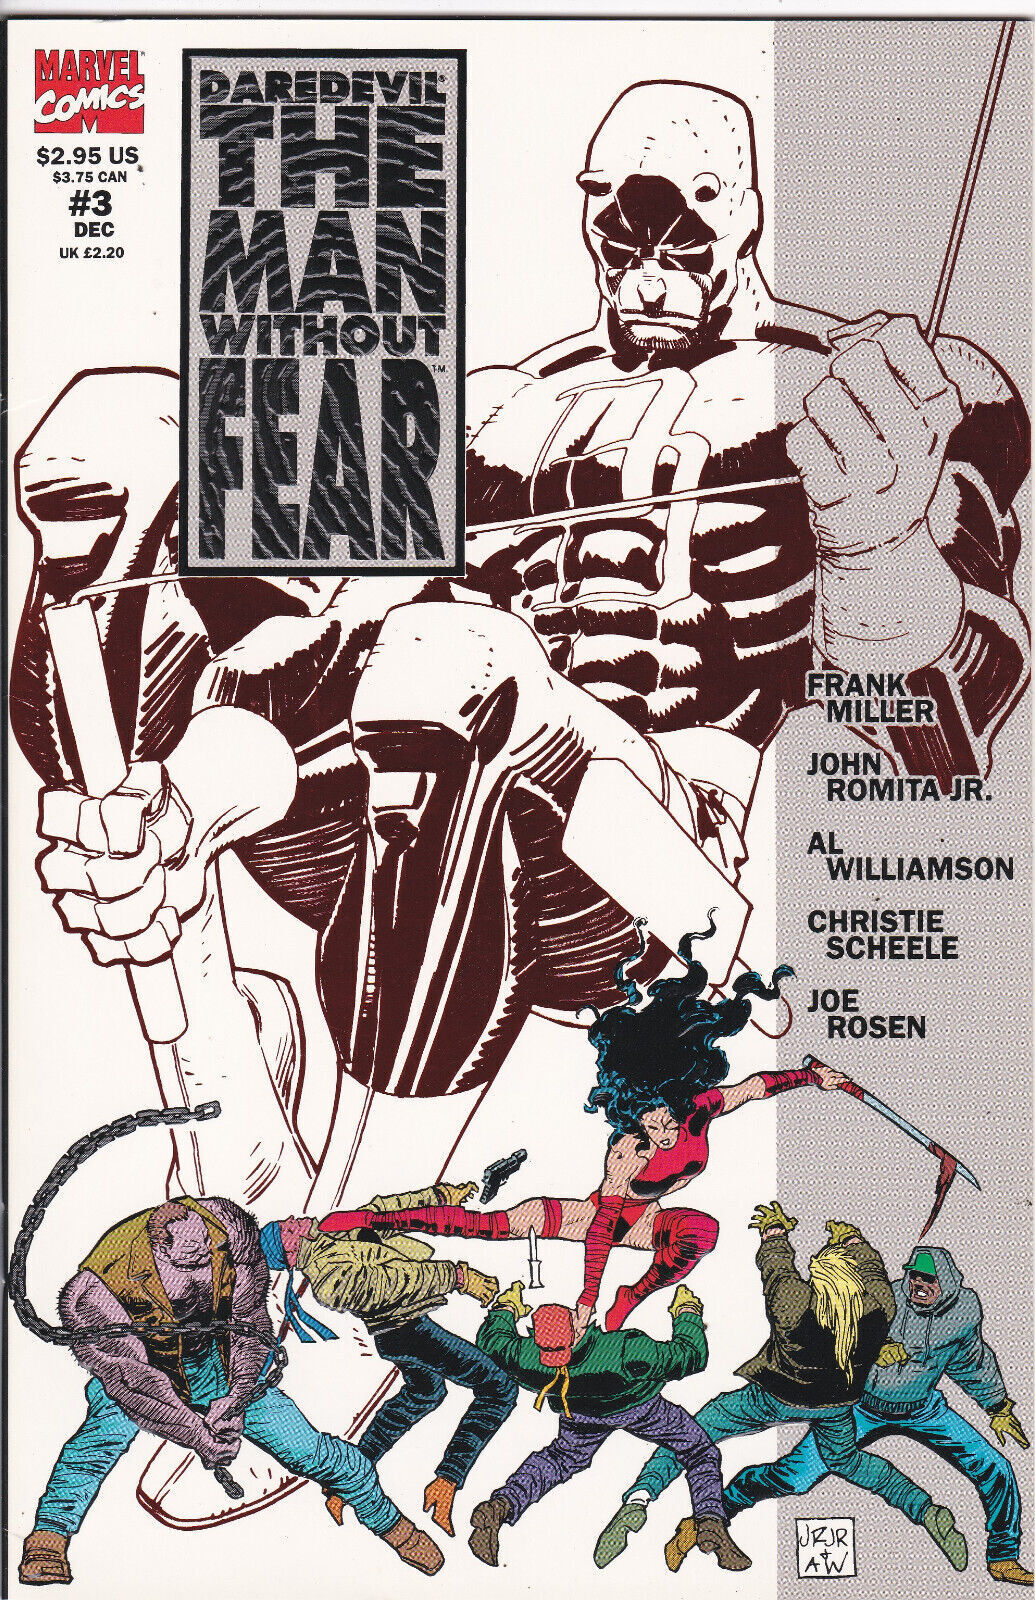 Daredevil: Man Without Fear #3 (1993-1994, 2008, 2013) Marvel Comics